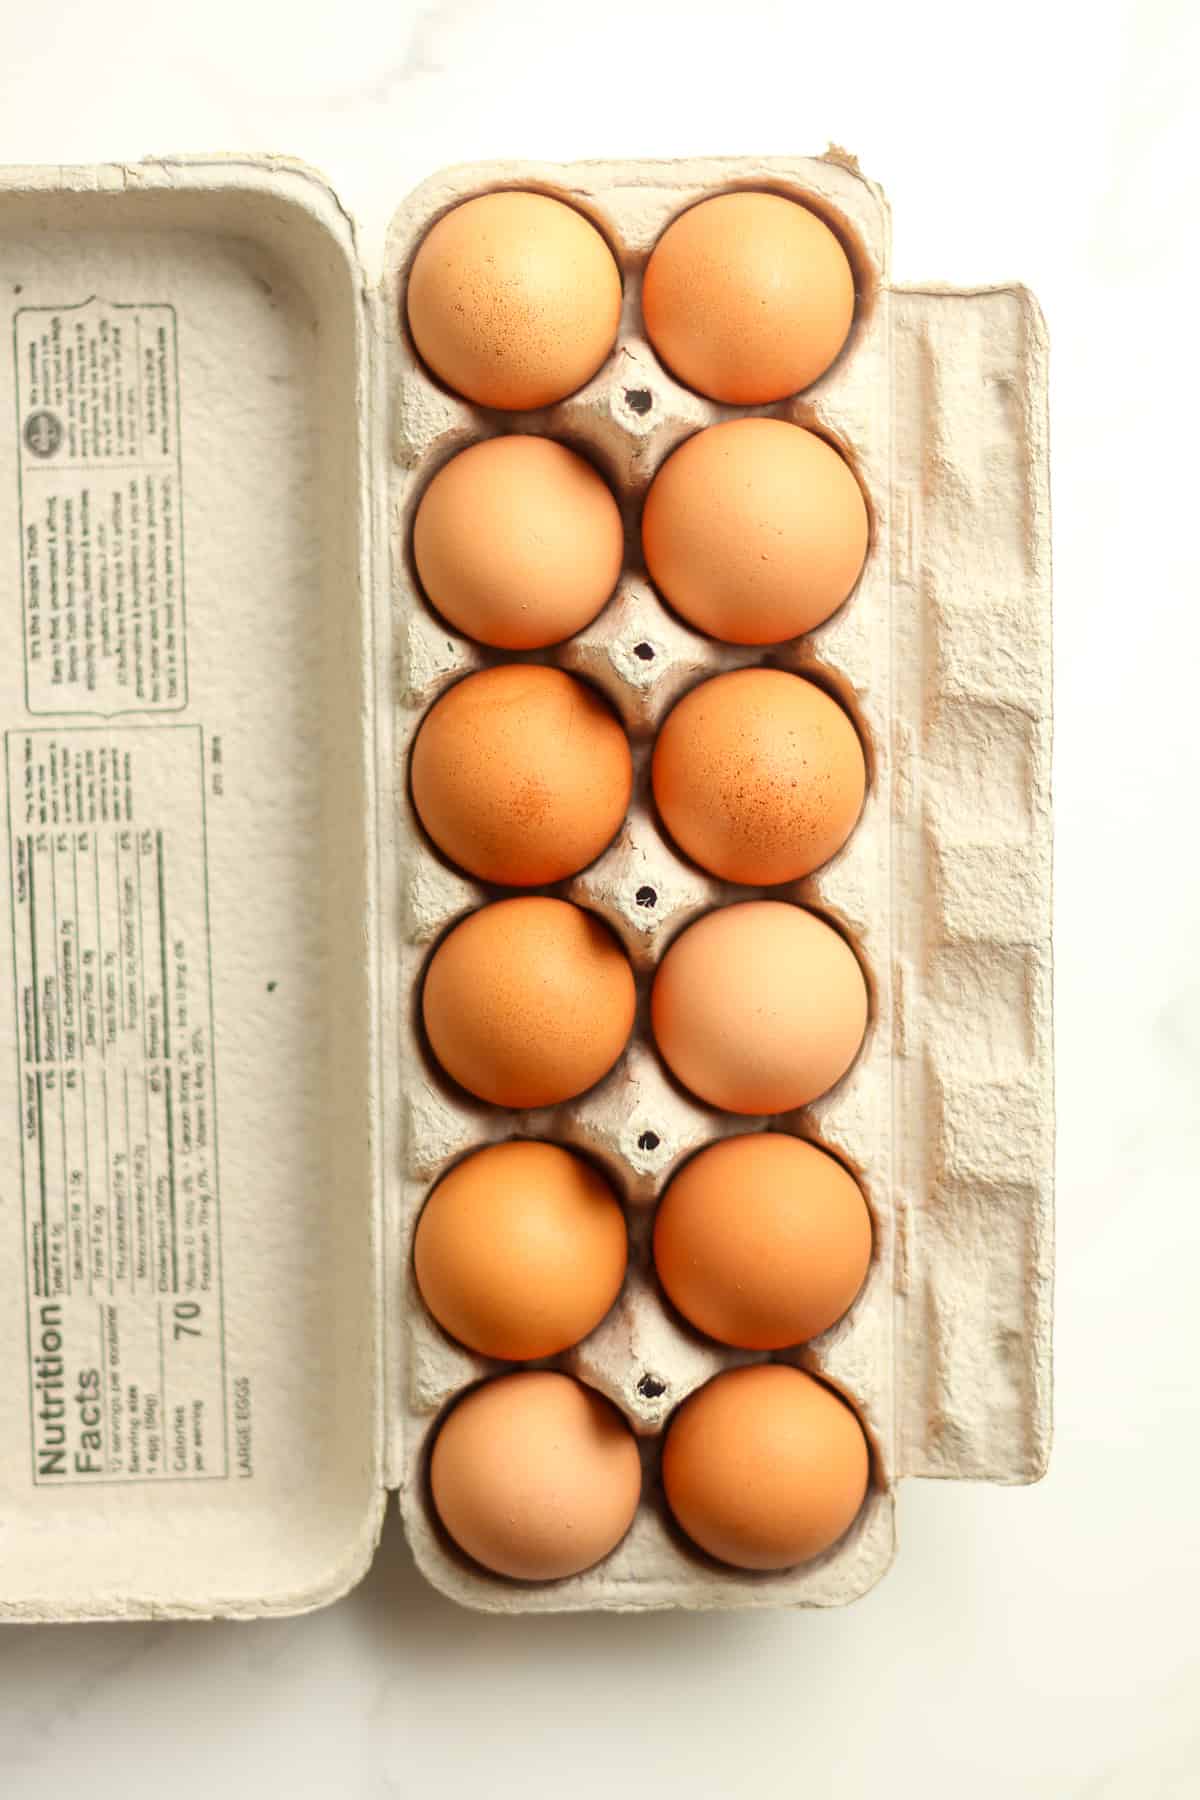 A 12 pack of cage free eggs.